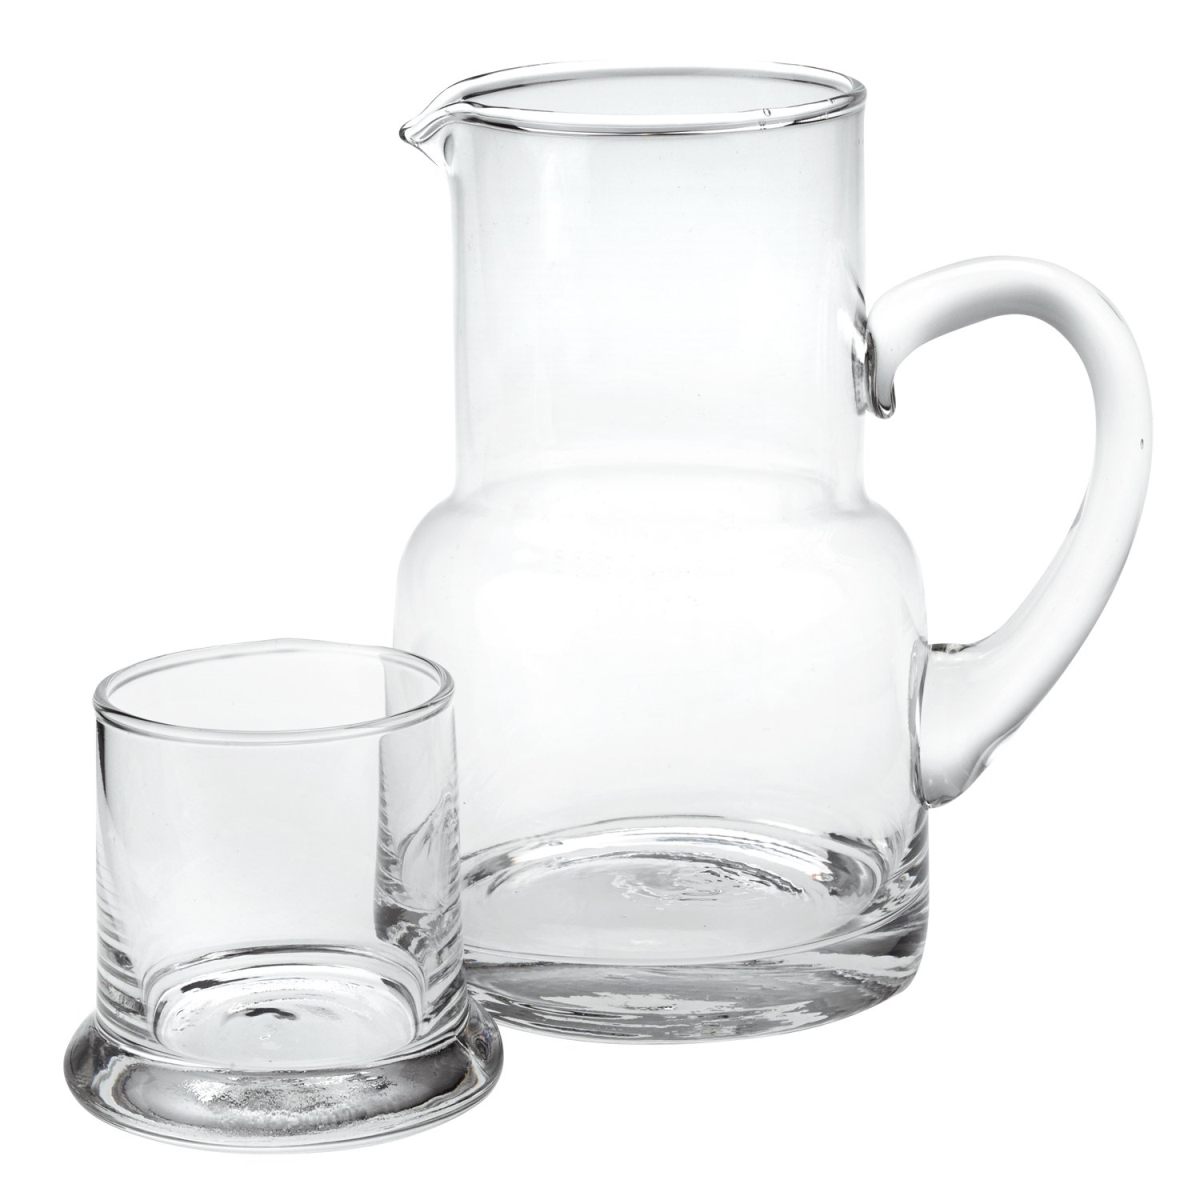 Picture of HomeRoots 375883 4 x 6 x 7 in. Clear Glass 2 Piece Glass Bedside or Desktop Carafe Set, 10 oz